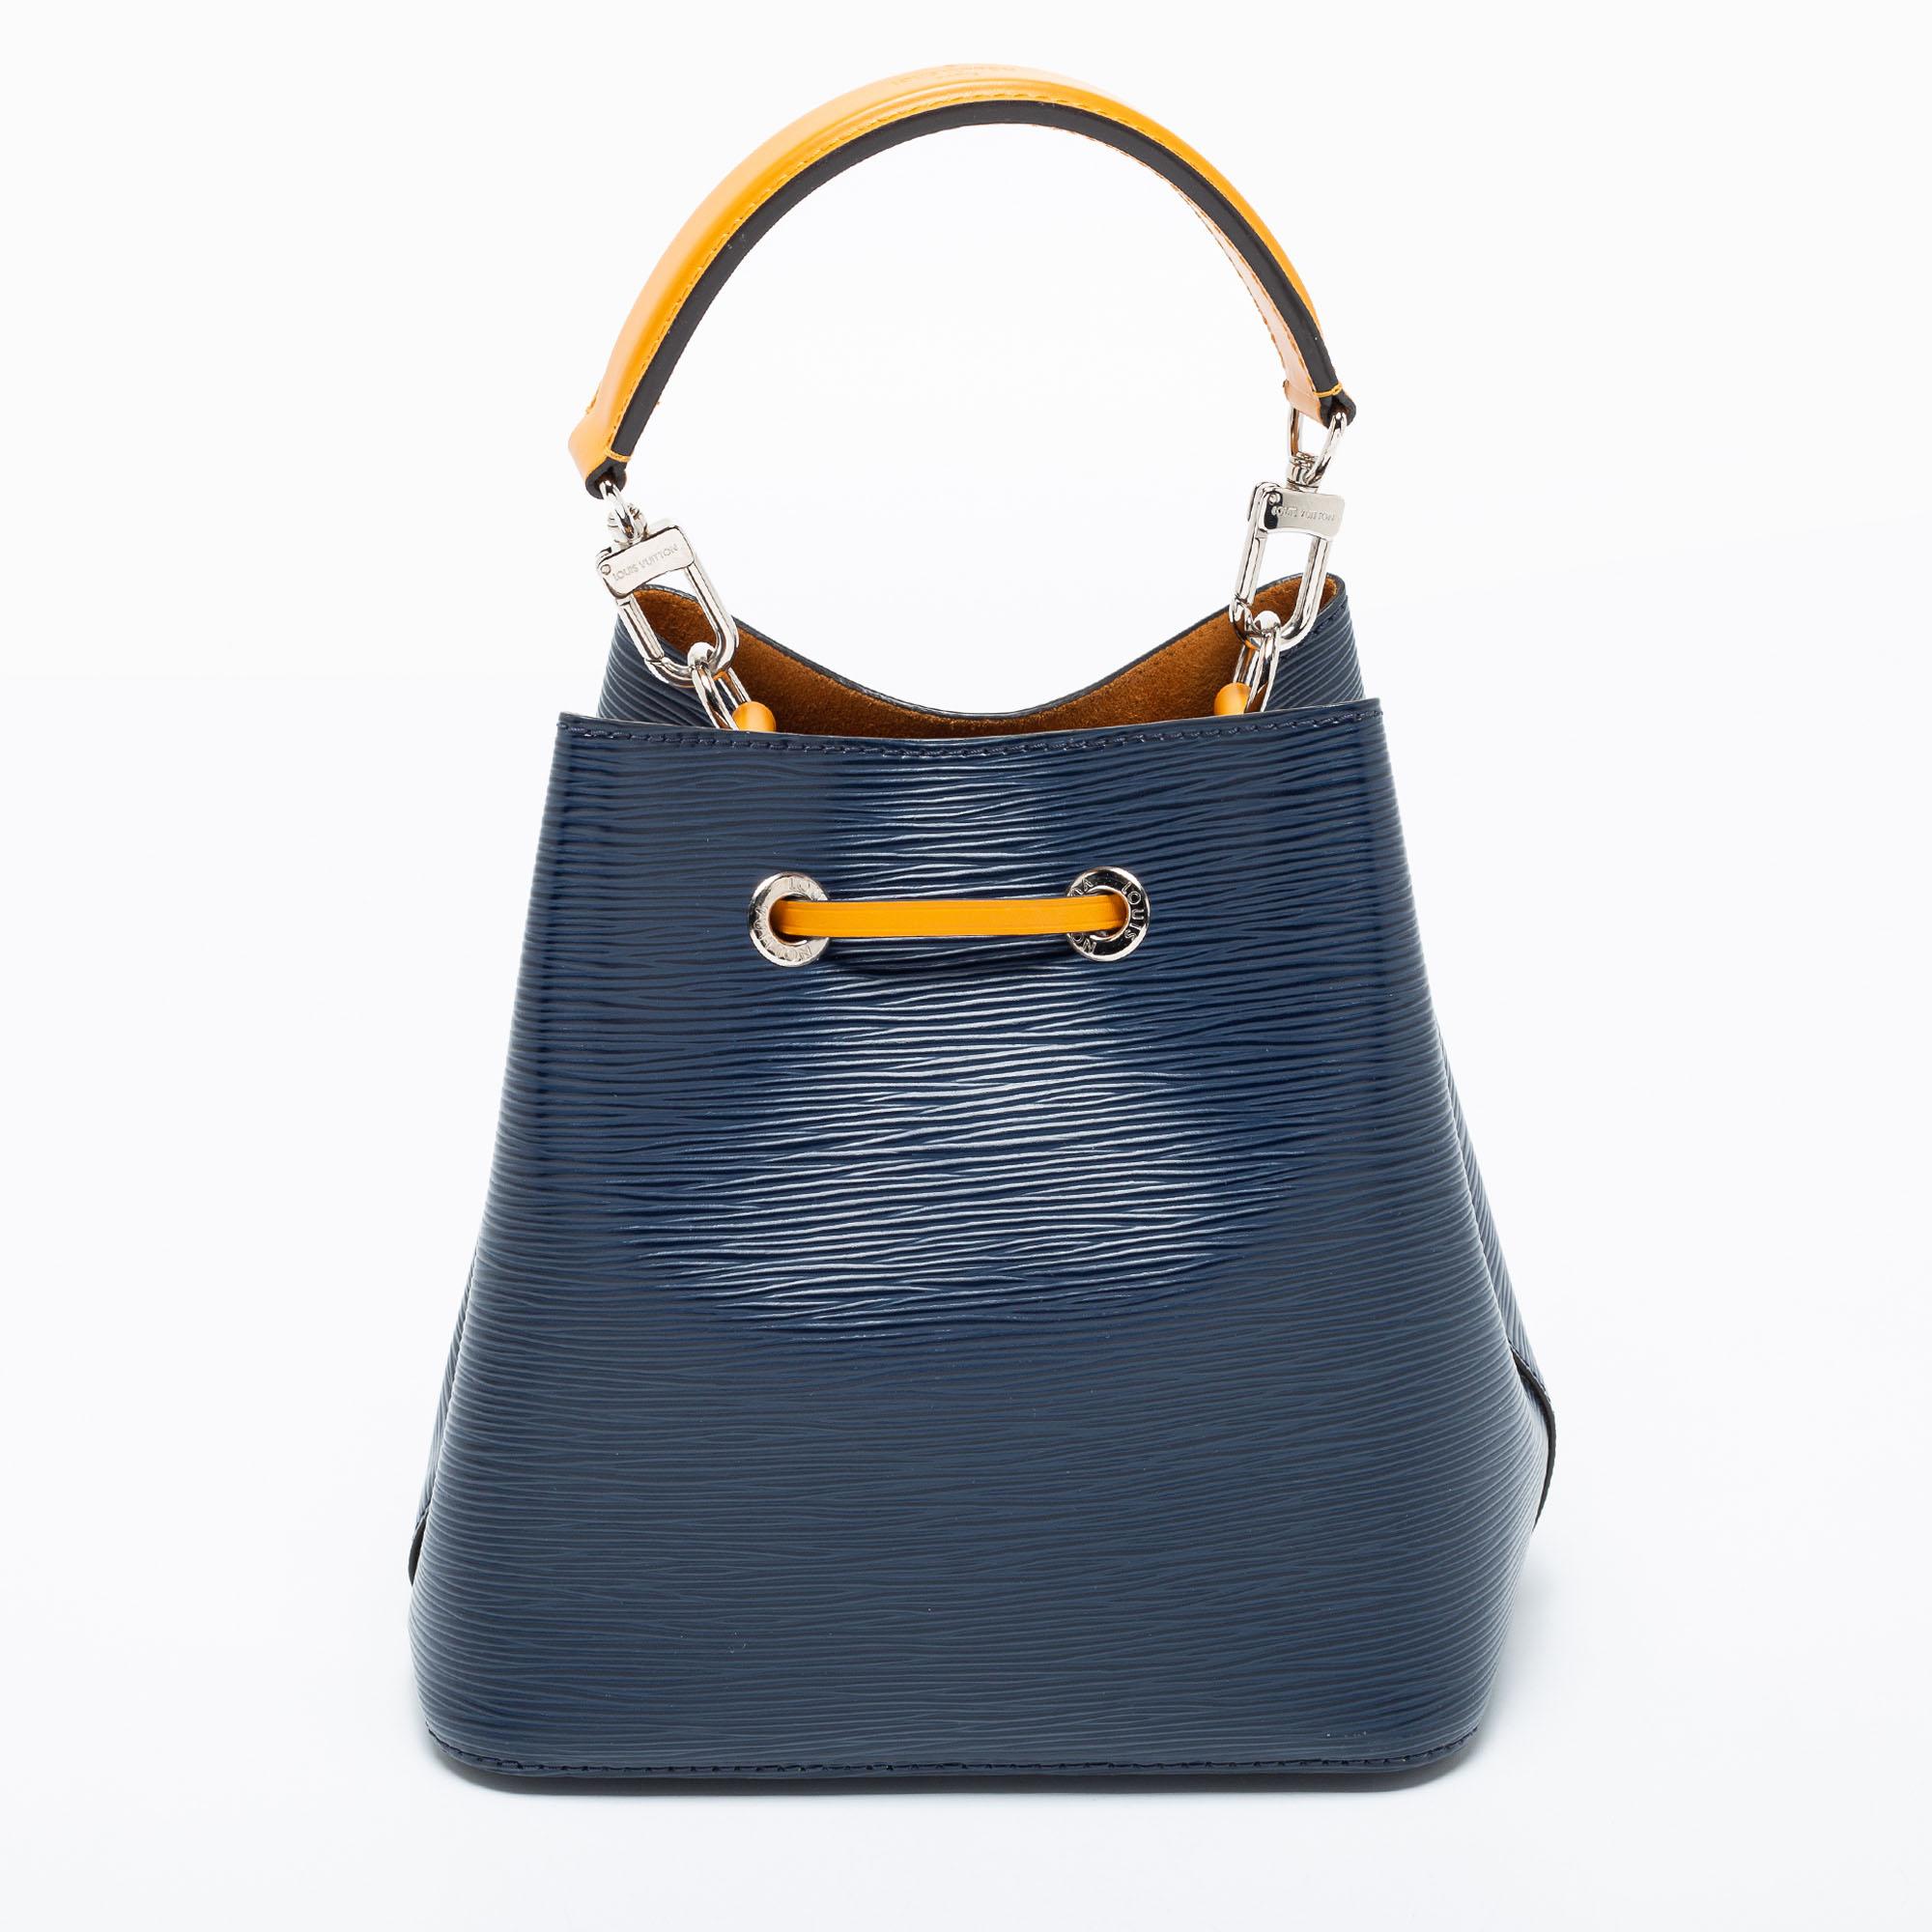 The NéoNoé from Louis Vuitton is a modernized update of the classic Noé Bag. With minimal design but striking elements, this bag will win your vote as your favorite handbag. Created from Epi leather in gorgeous colors, it features silver-tone